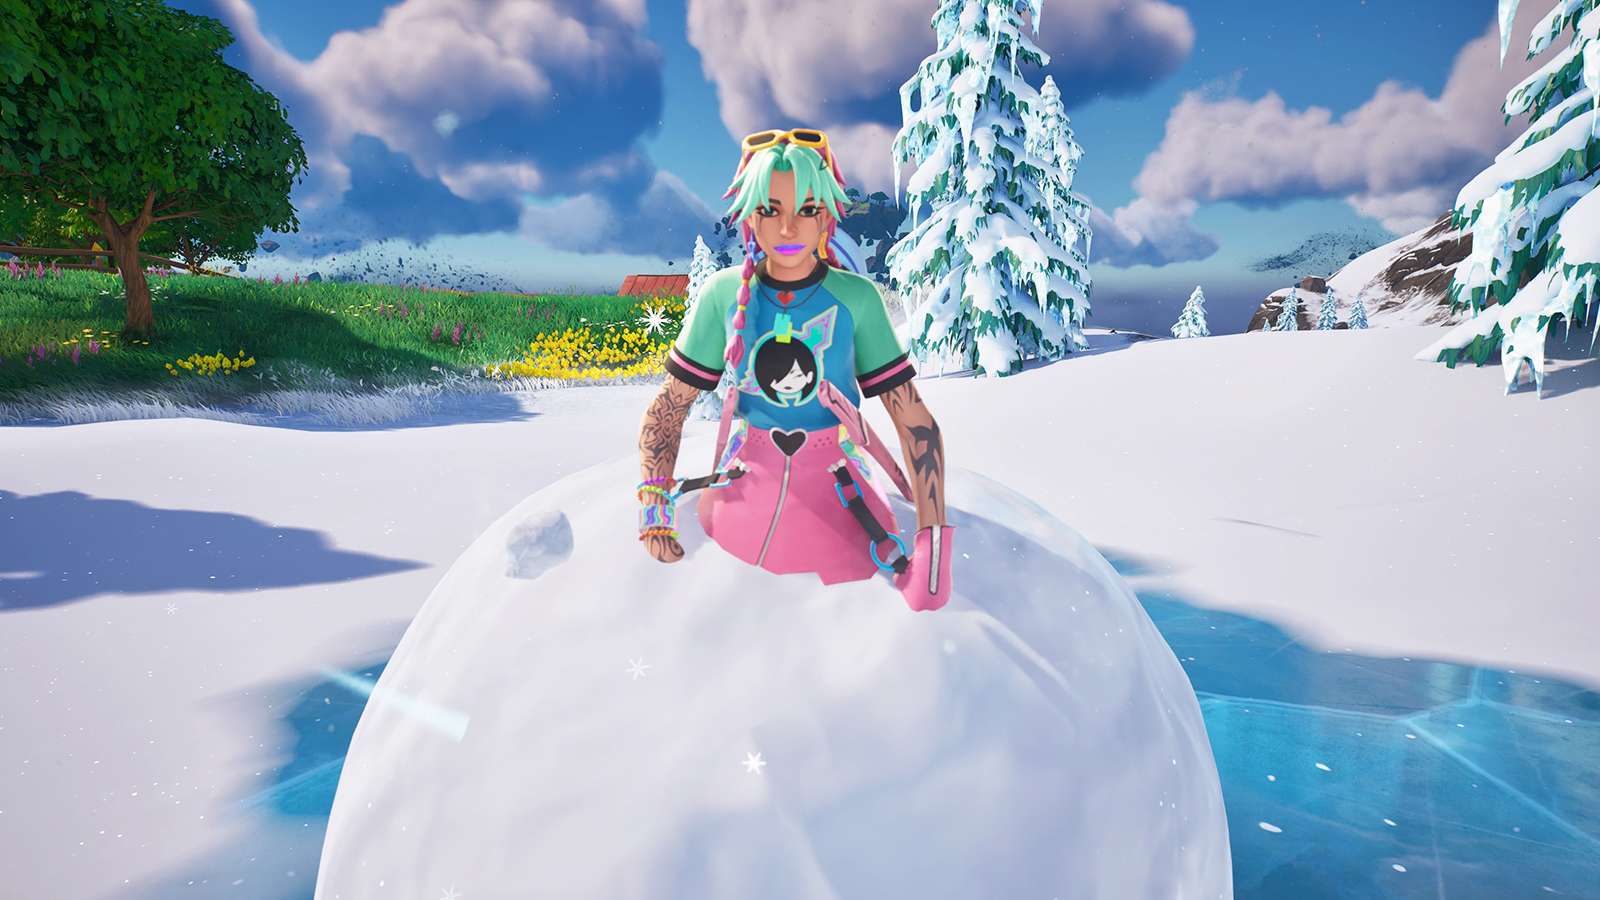 A Fortnite player hiding in a Giant Snowball